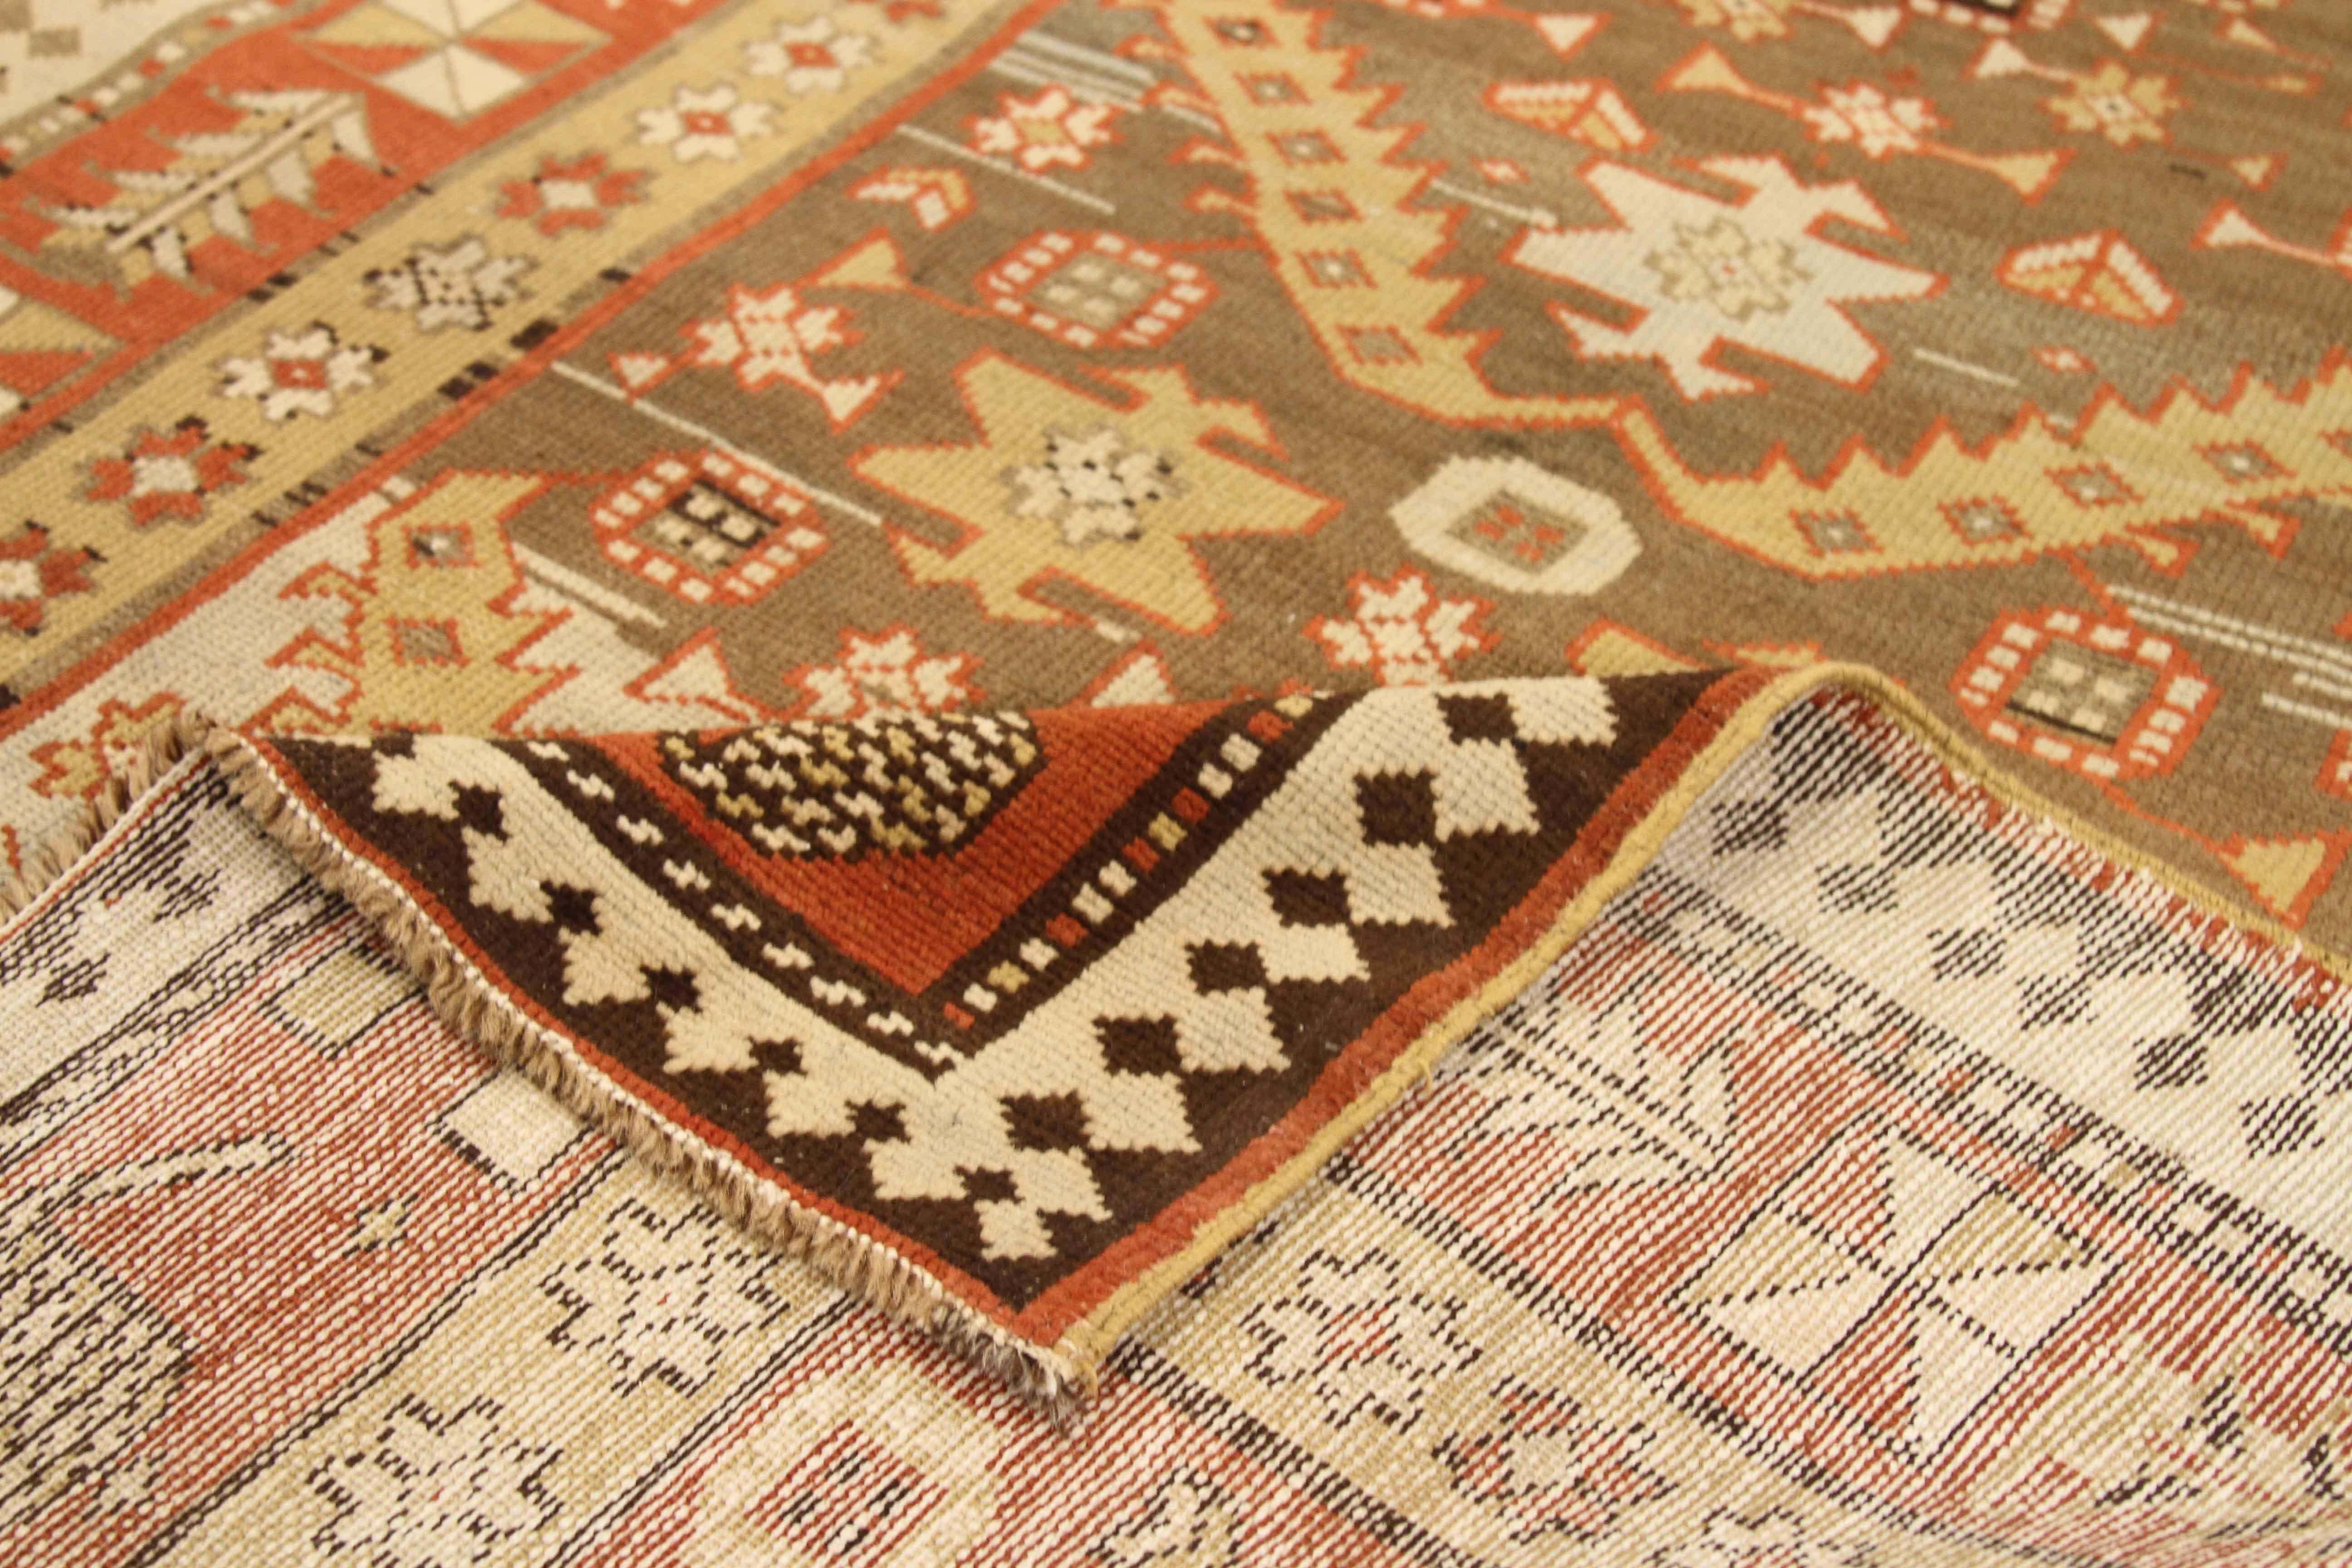 Antique Persian rug handmade in the 1920s from the highest quality of wool and vegetable dyes. It features an ancient tribal design with highly intricate details crafted using Ghafghaz style of weaving. Traditional colors of ivory, red, yellow, and